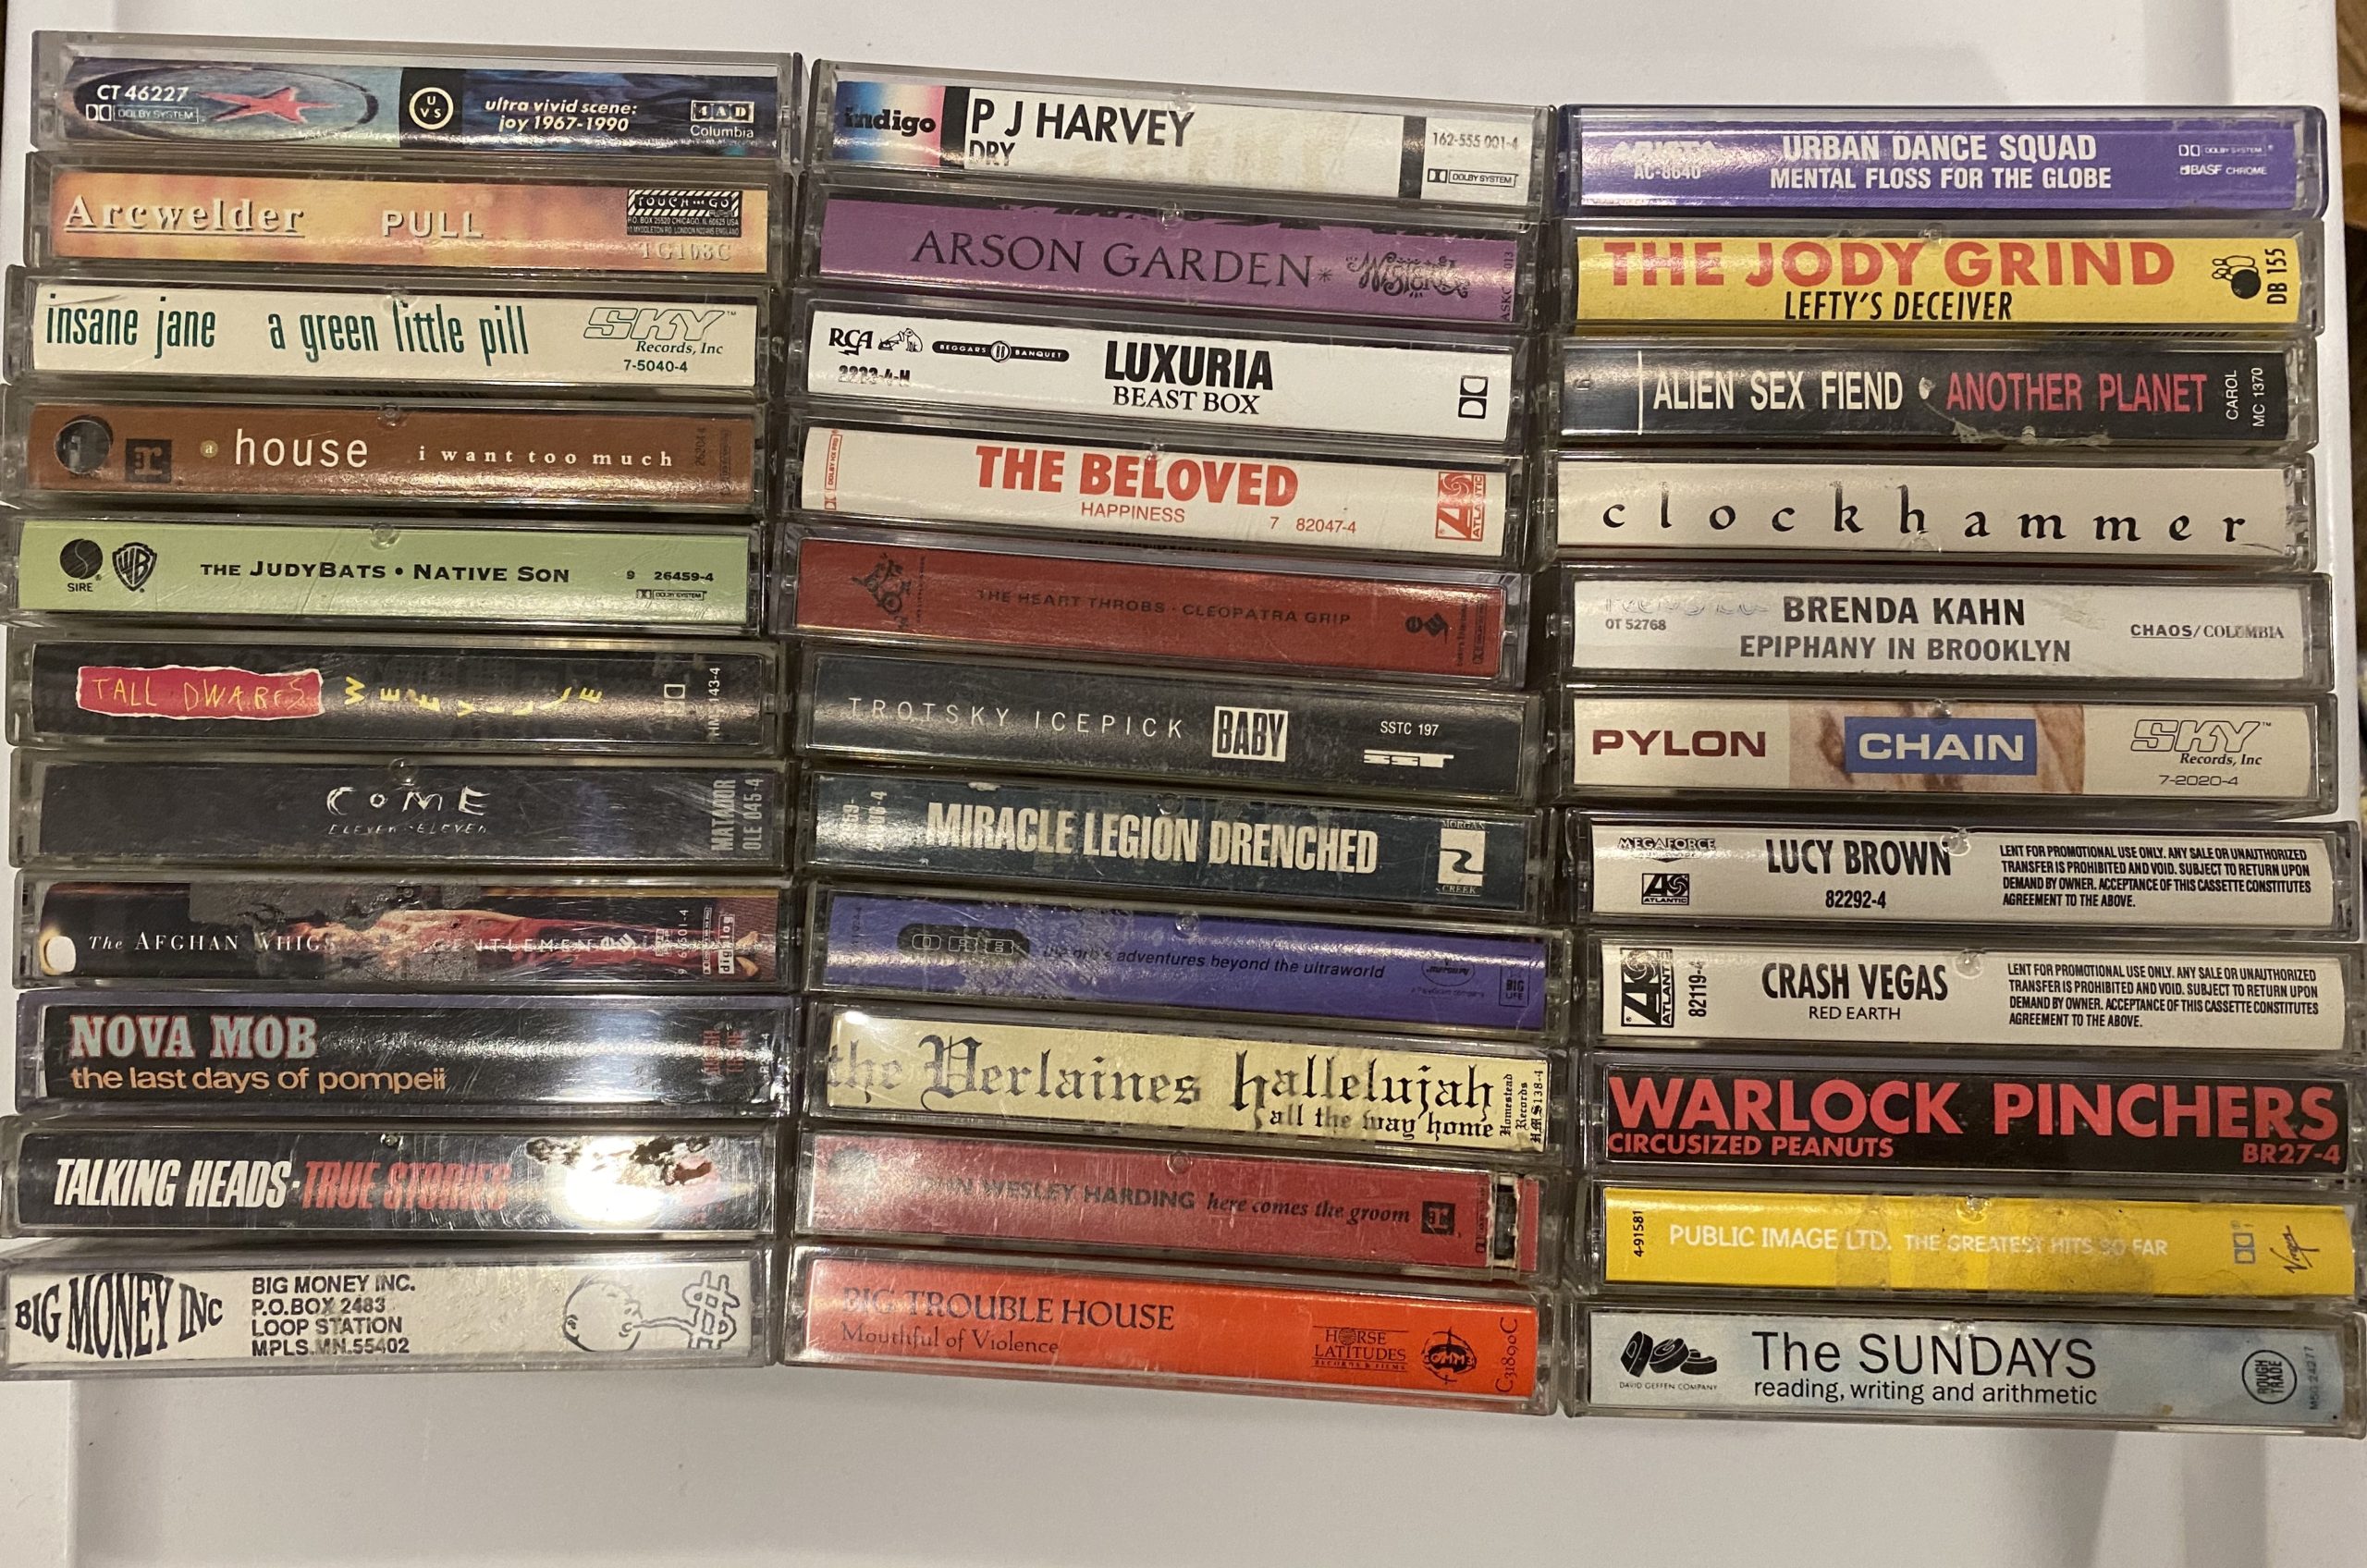 Cassette tape purchases influenced by Noise